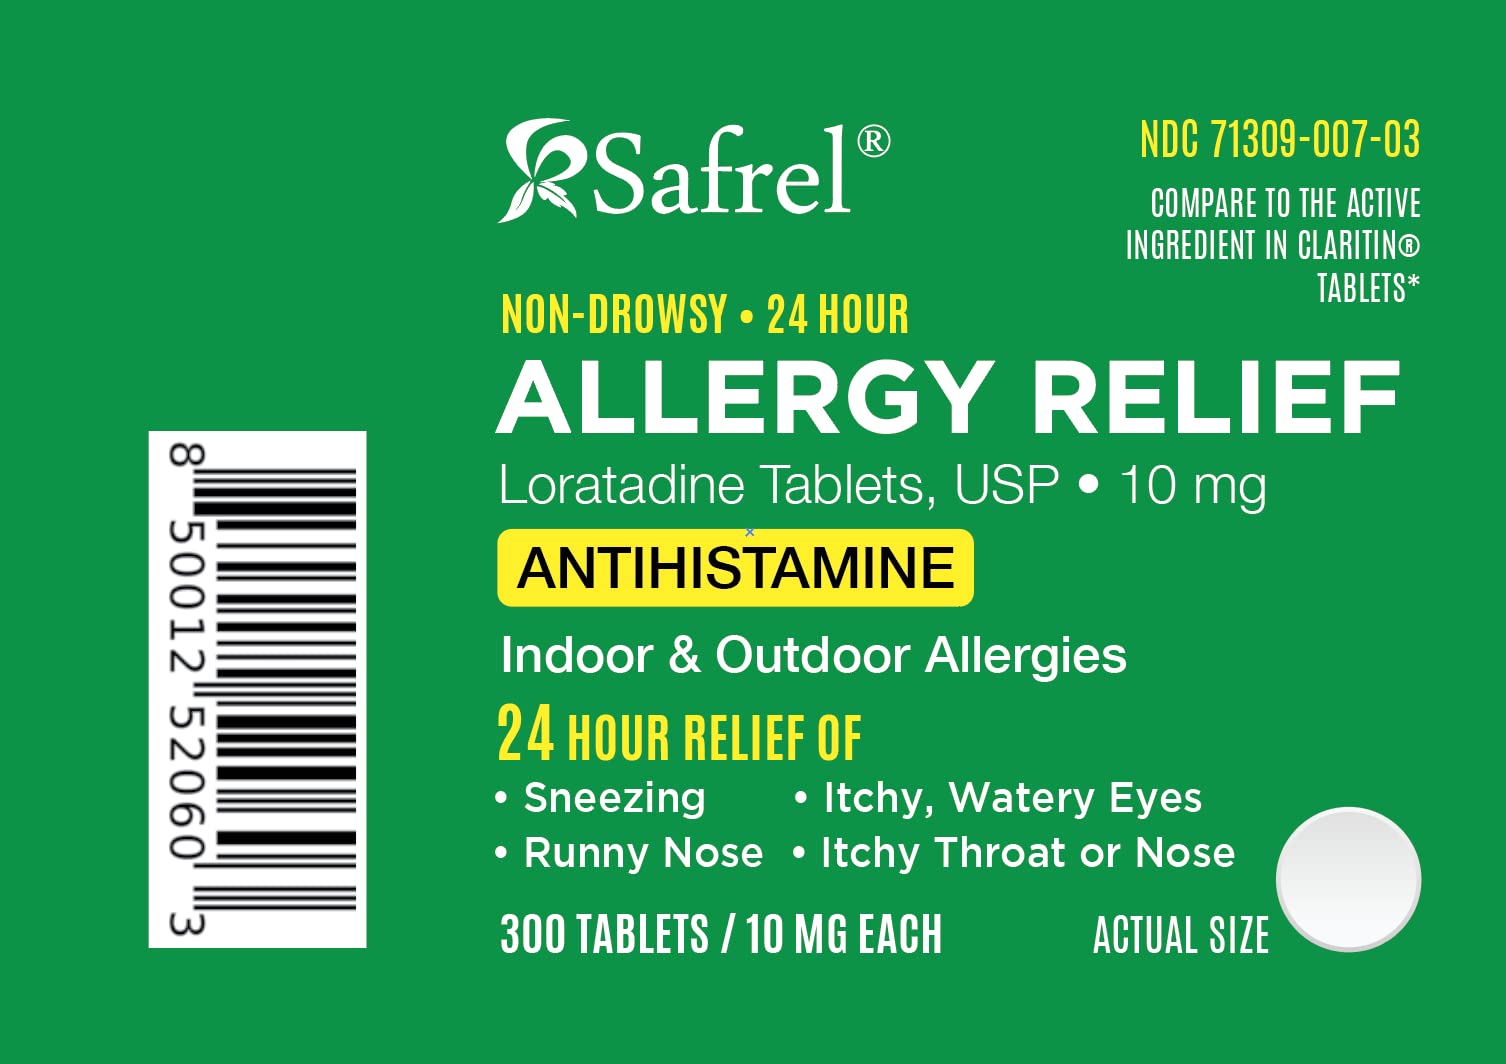 Safrel Loratadine 10mg 300 Tablets | Non-Drowsy 24 Hour Allergy Relief Medicine | Antihistamine Support for Runny Nose, Sneezing, Itchy, Watery Eyes | Compare to Claritin Tablets Prescription Strength